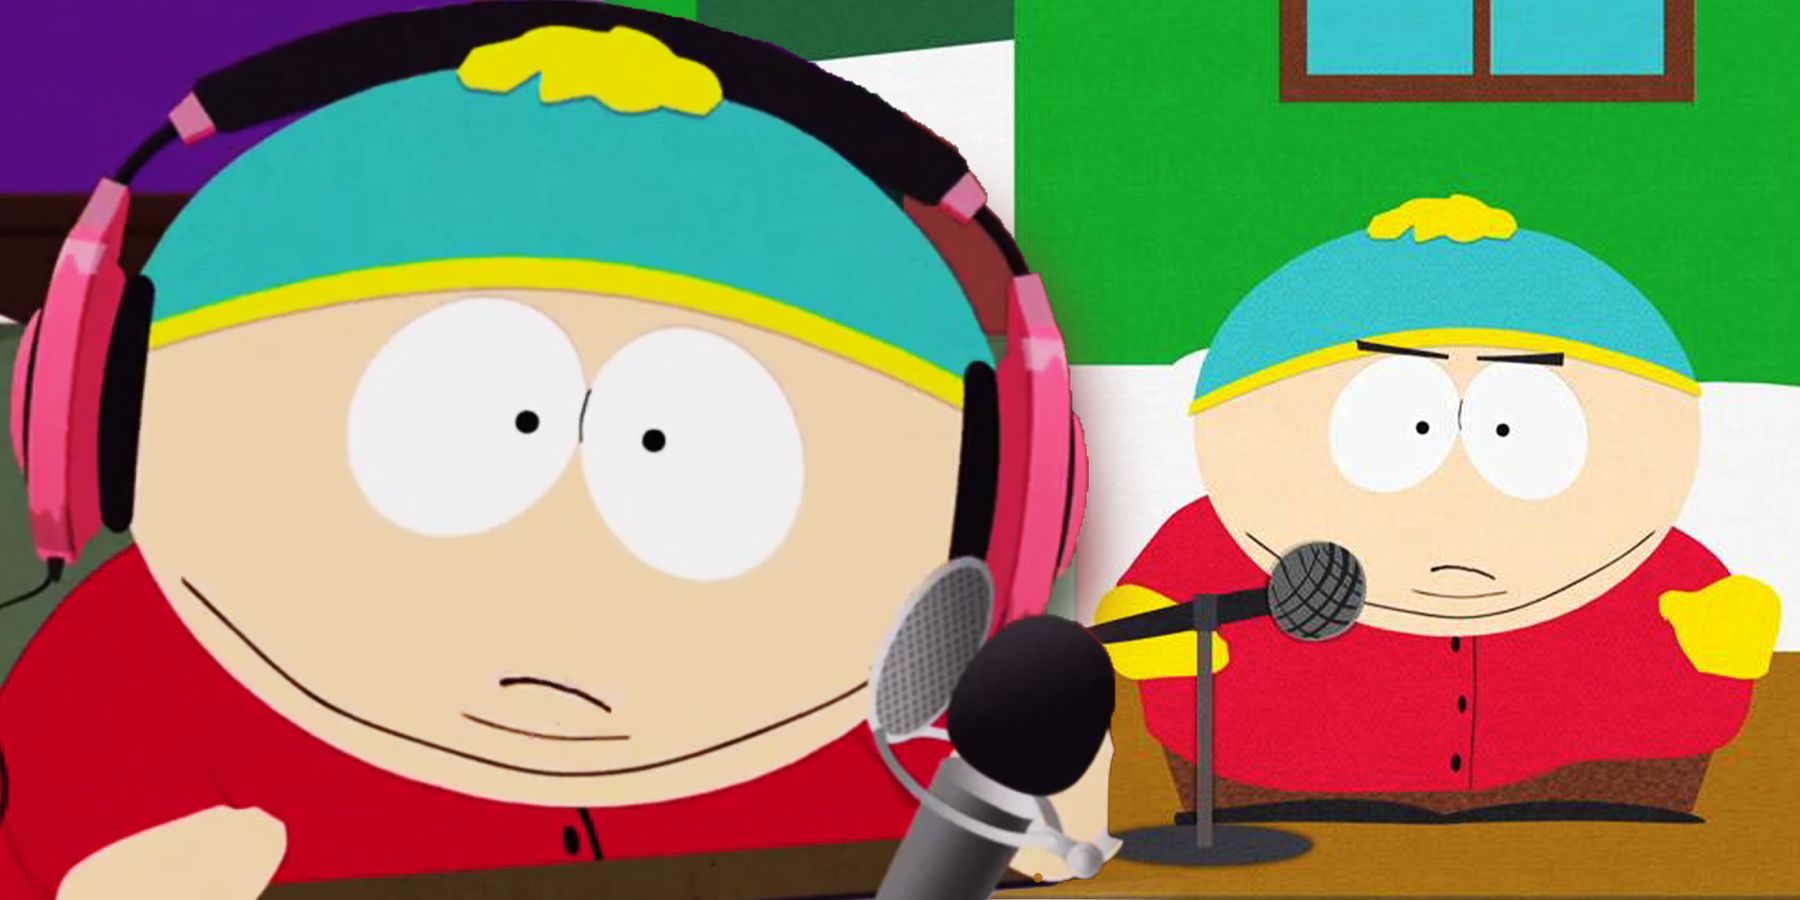 Eric Cartman's Best Quotes In South Park, Ranked